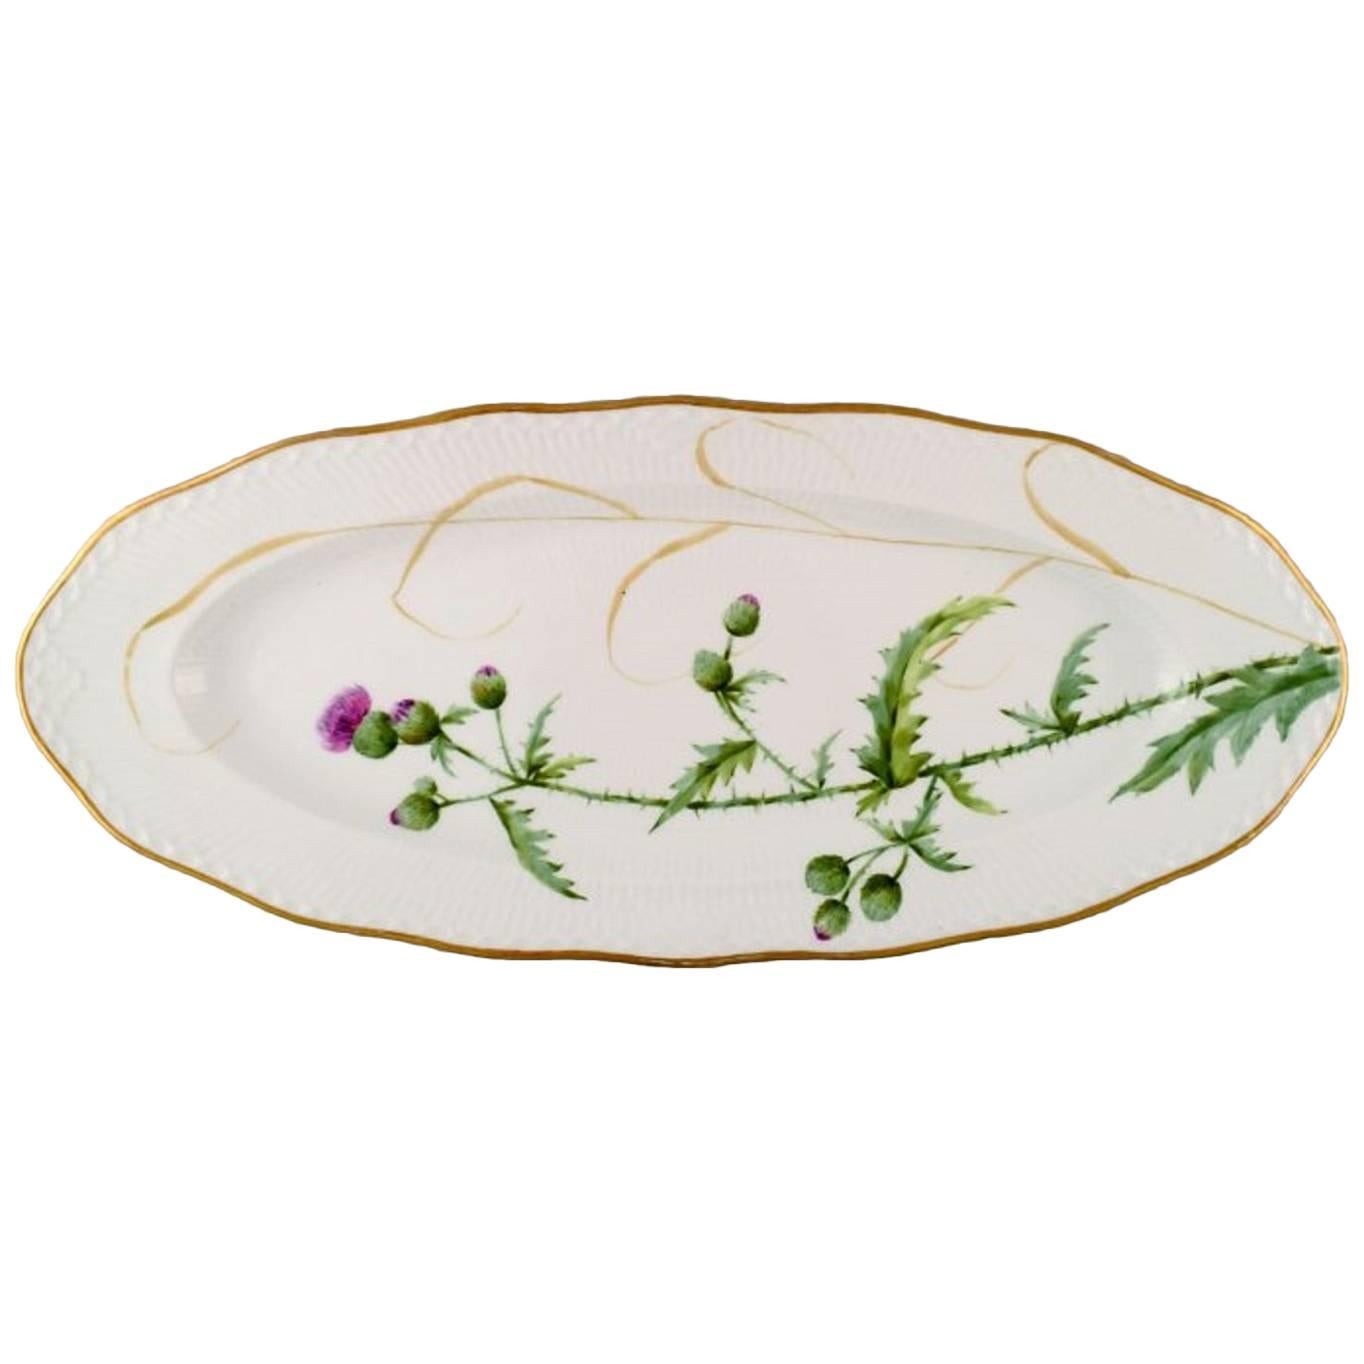 Antique Royal Copenhagen Fish Platter, Hand-Painted in High Quality